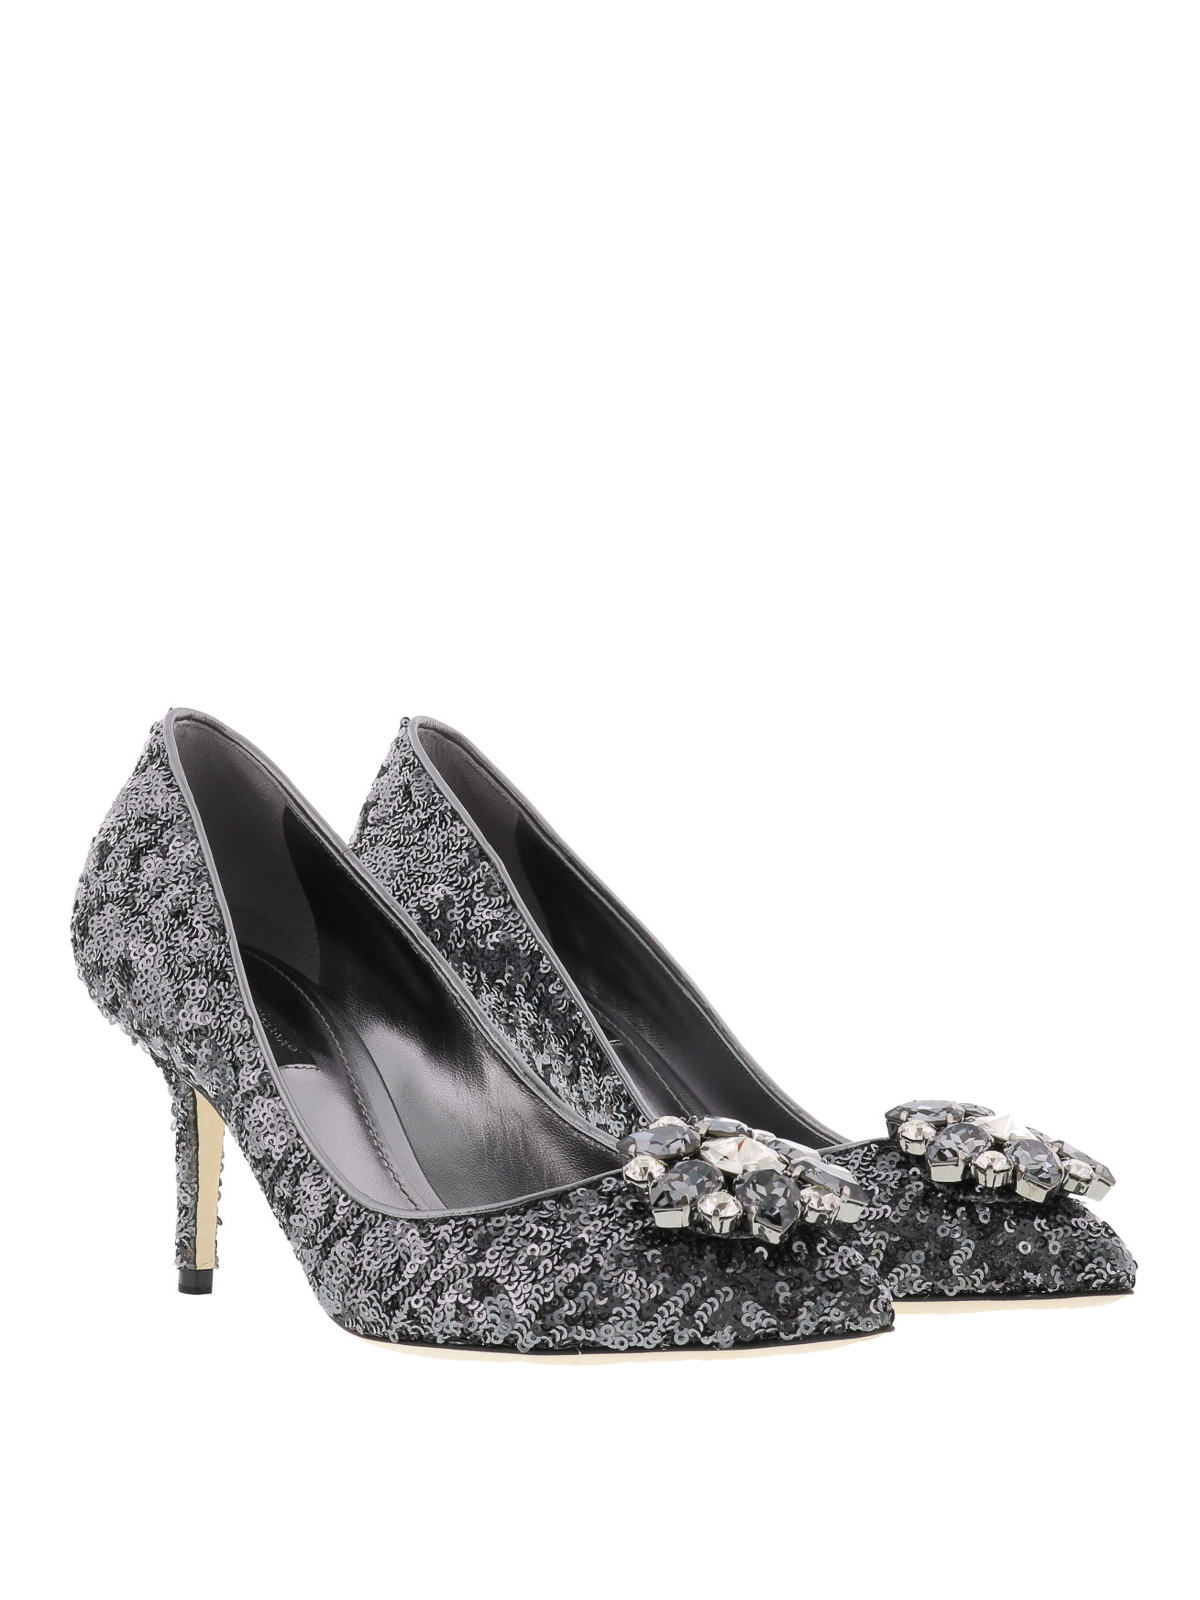 Court shoes Dolce & Gabbana - Jewel sequined pumps - CD0730AE7268M050